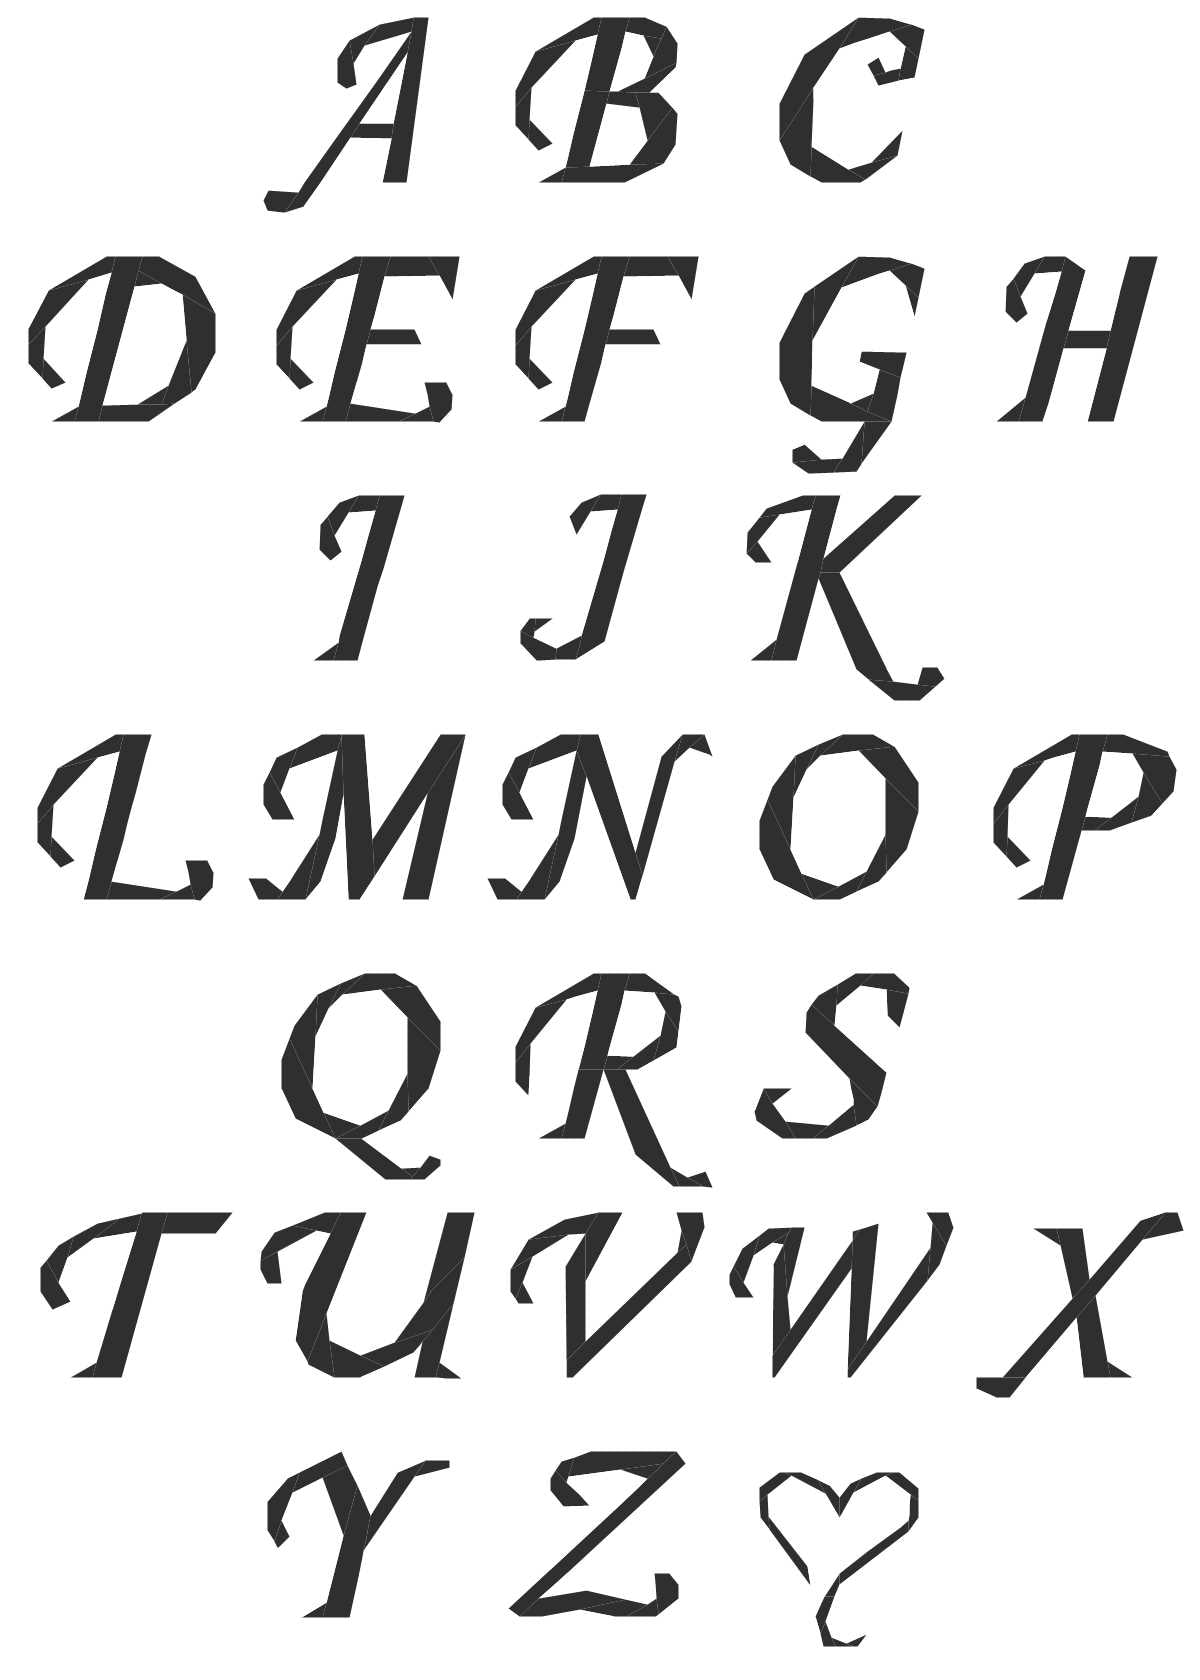 a paper pieced alphabet using a script style font with a heart